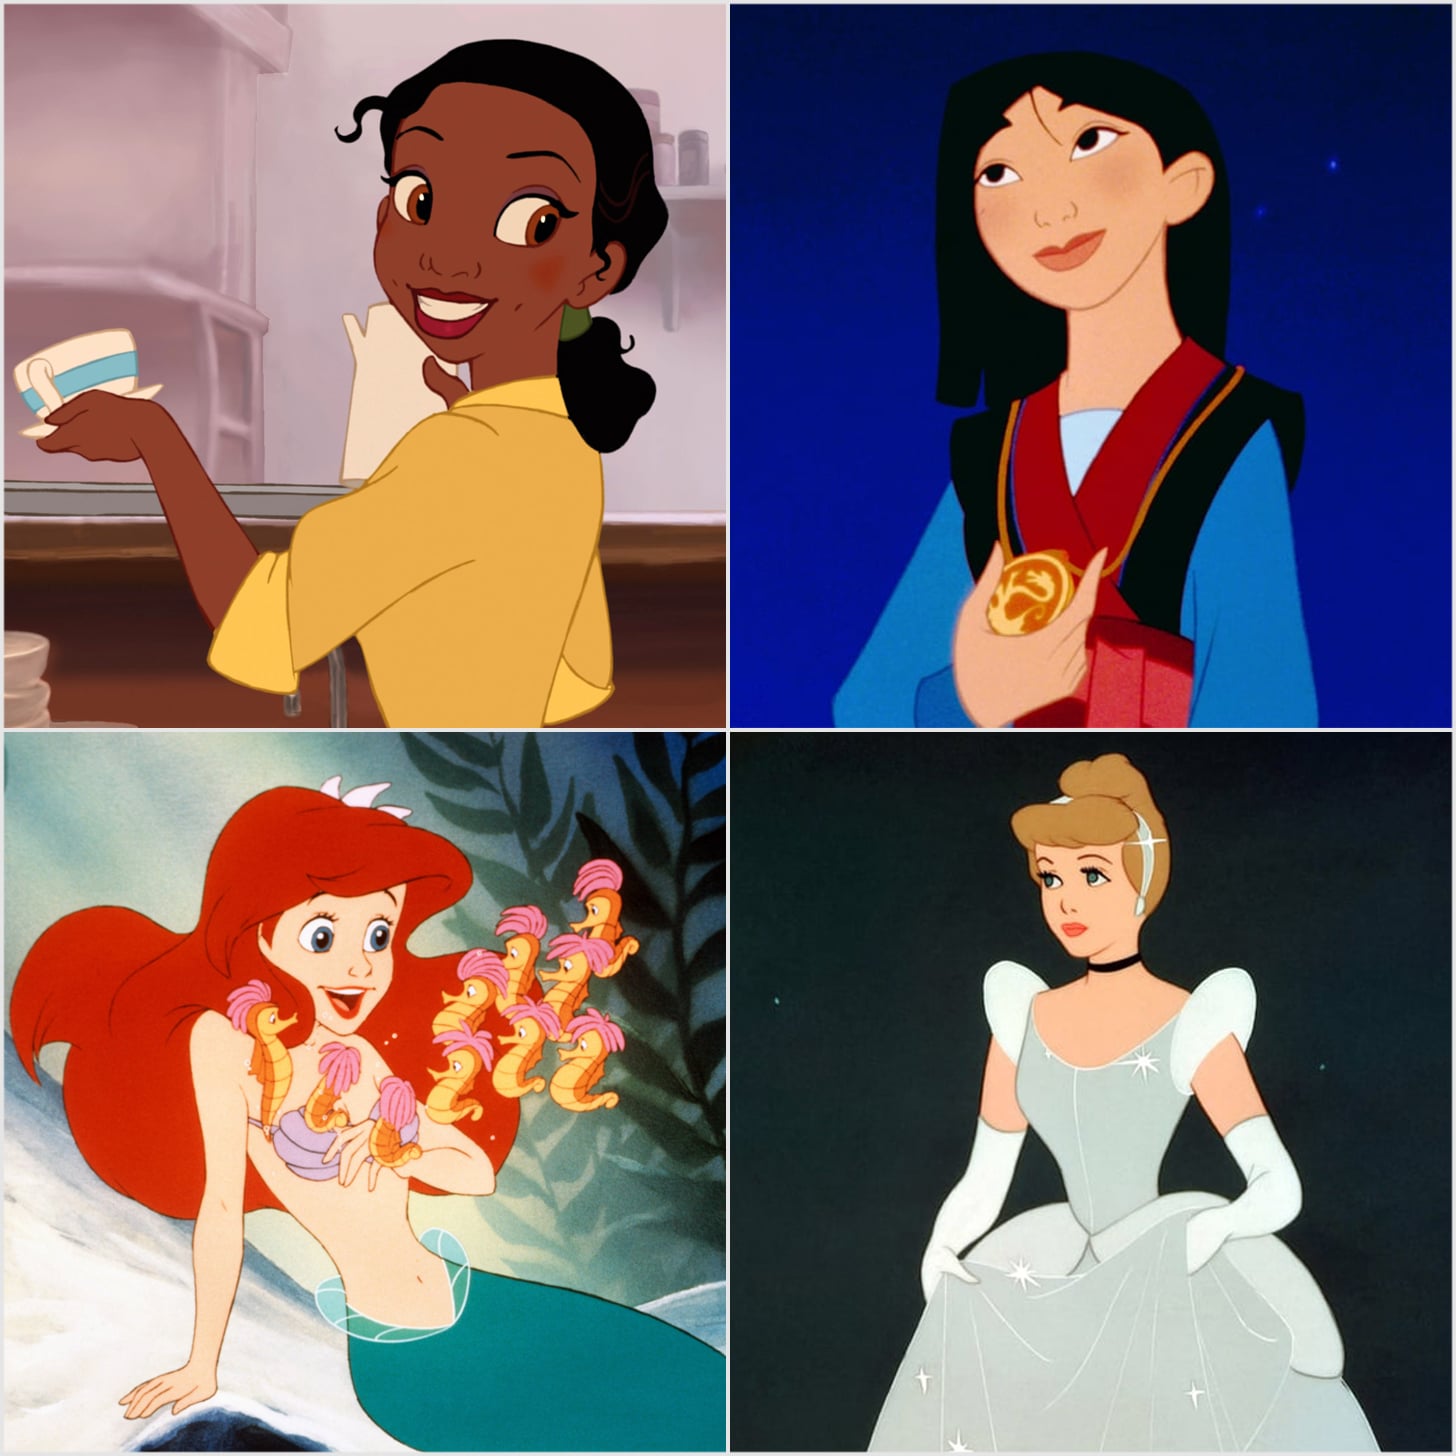 How Disney princesses can help young girls be more confident at